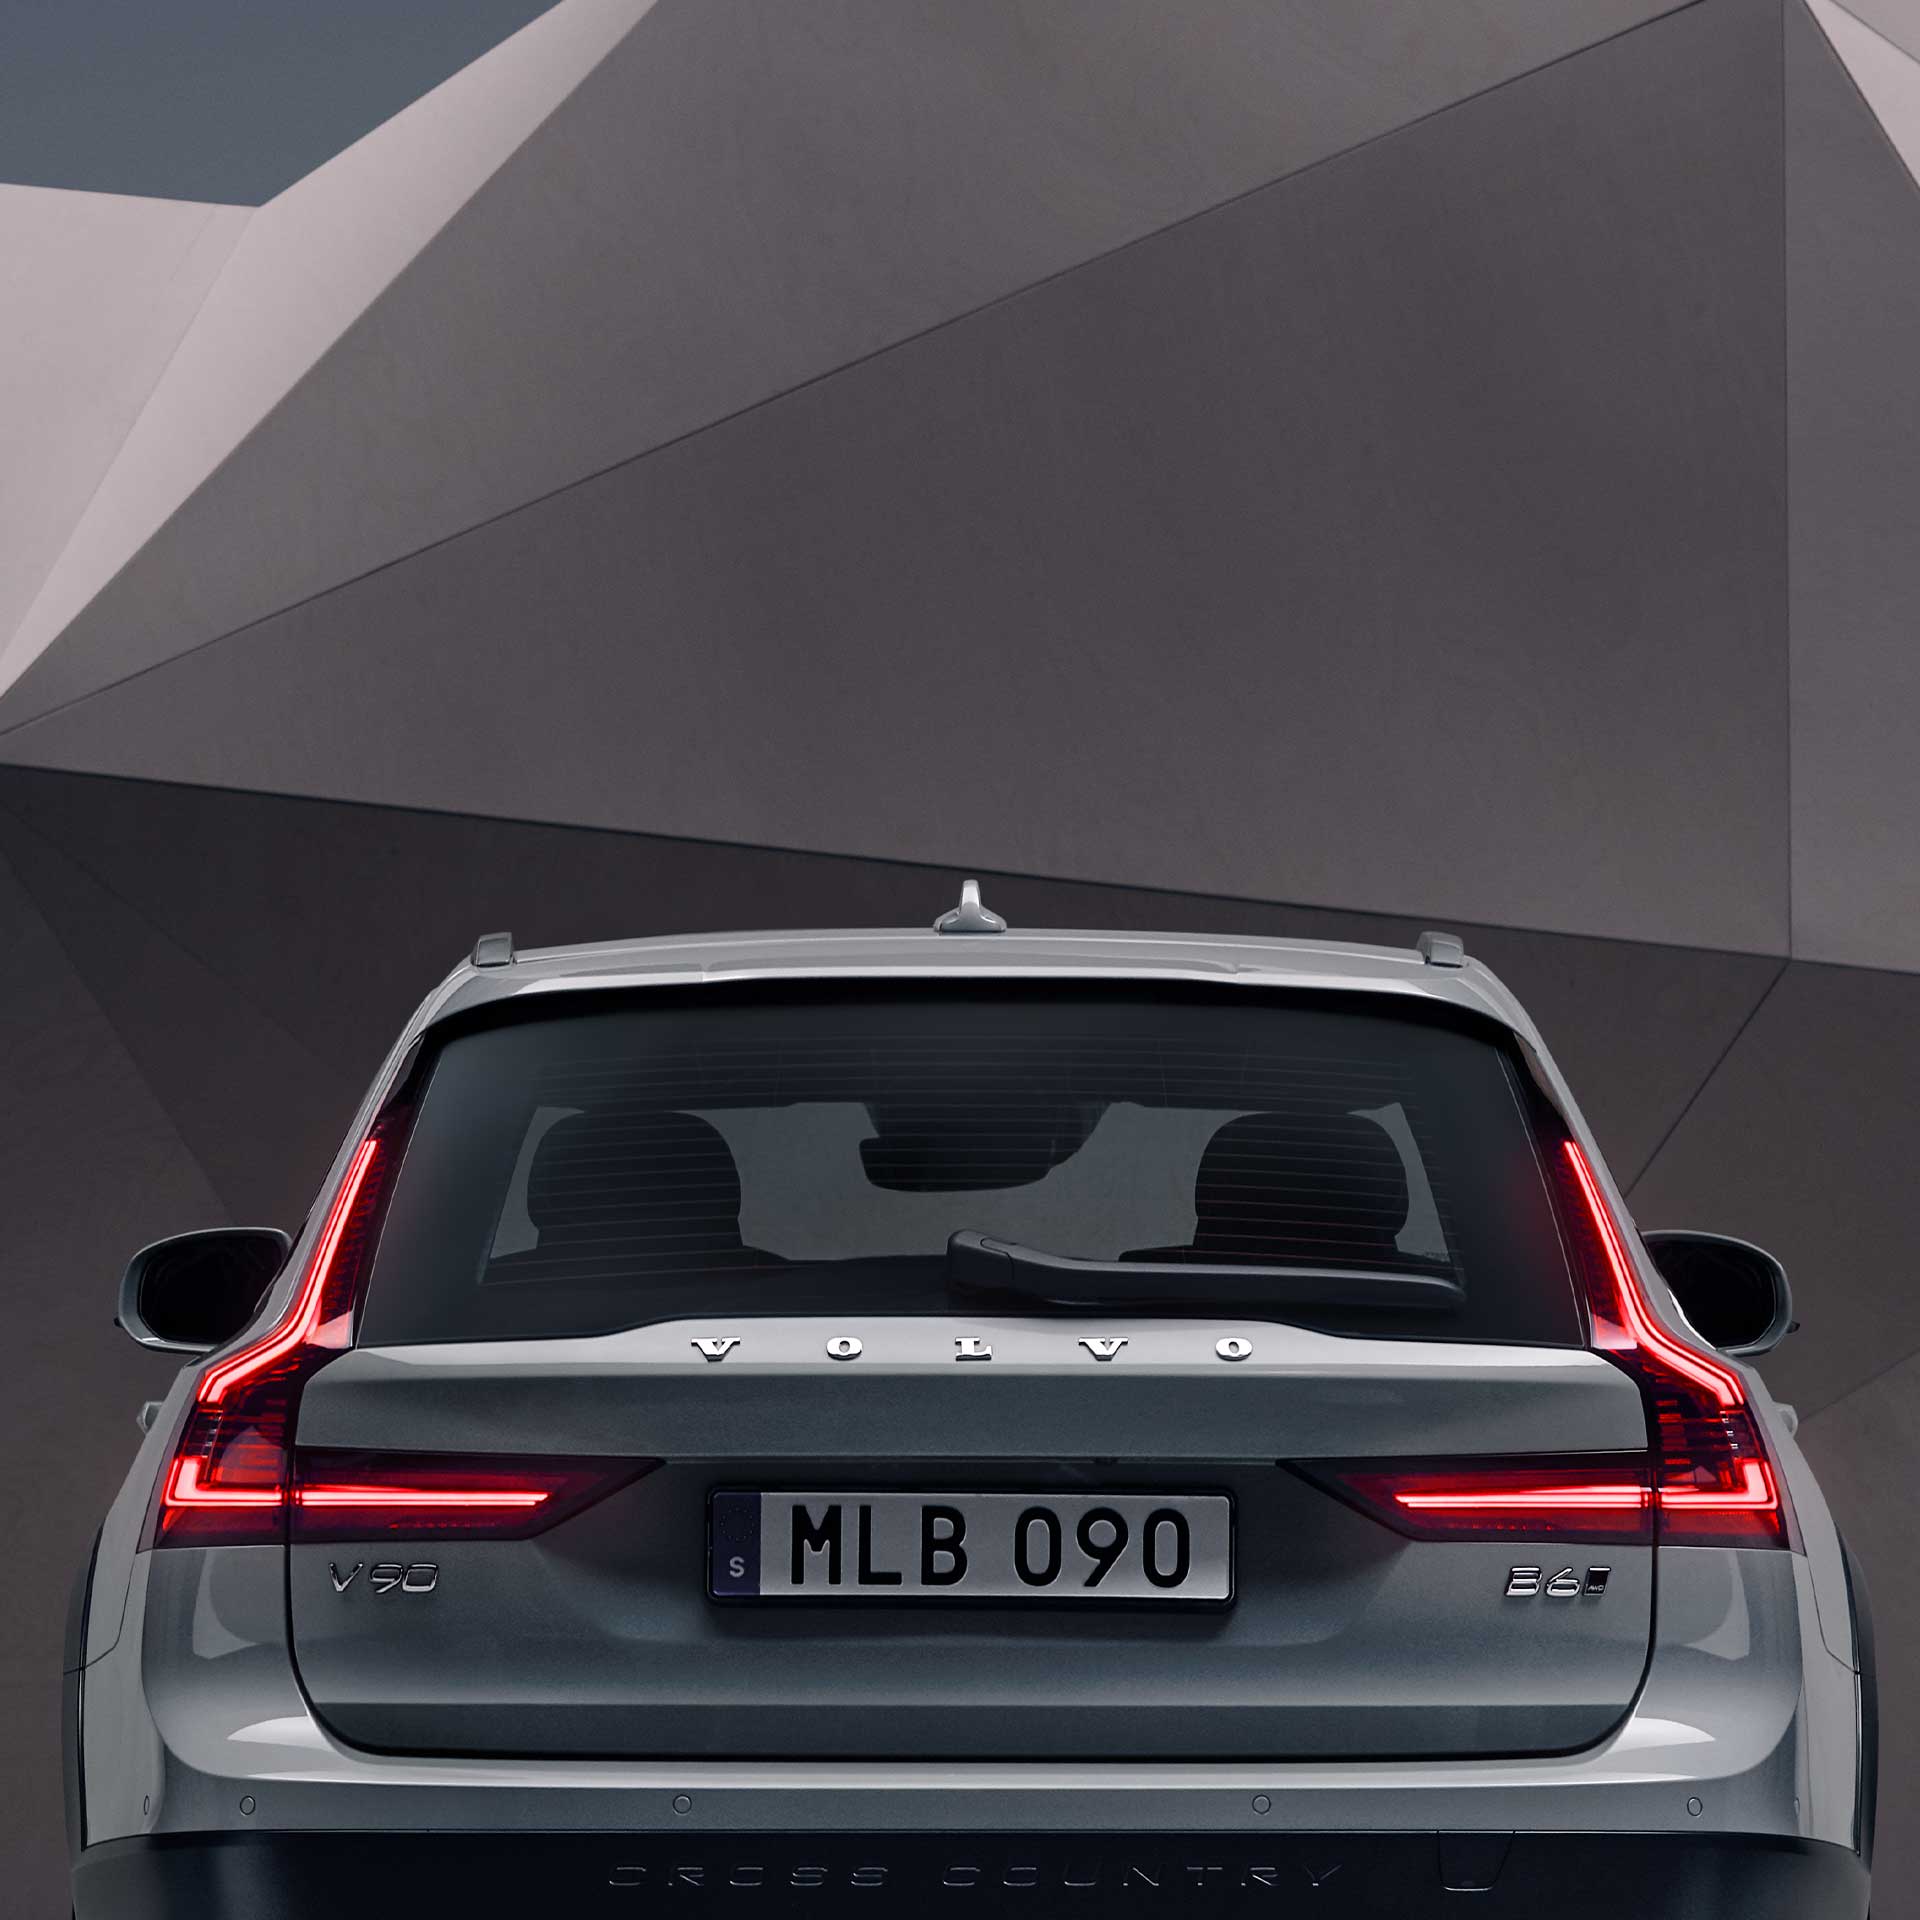 The rear exterior of a grey Volvo V90 Cross Country standing in front of an artistic wall.